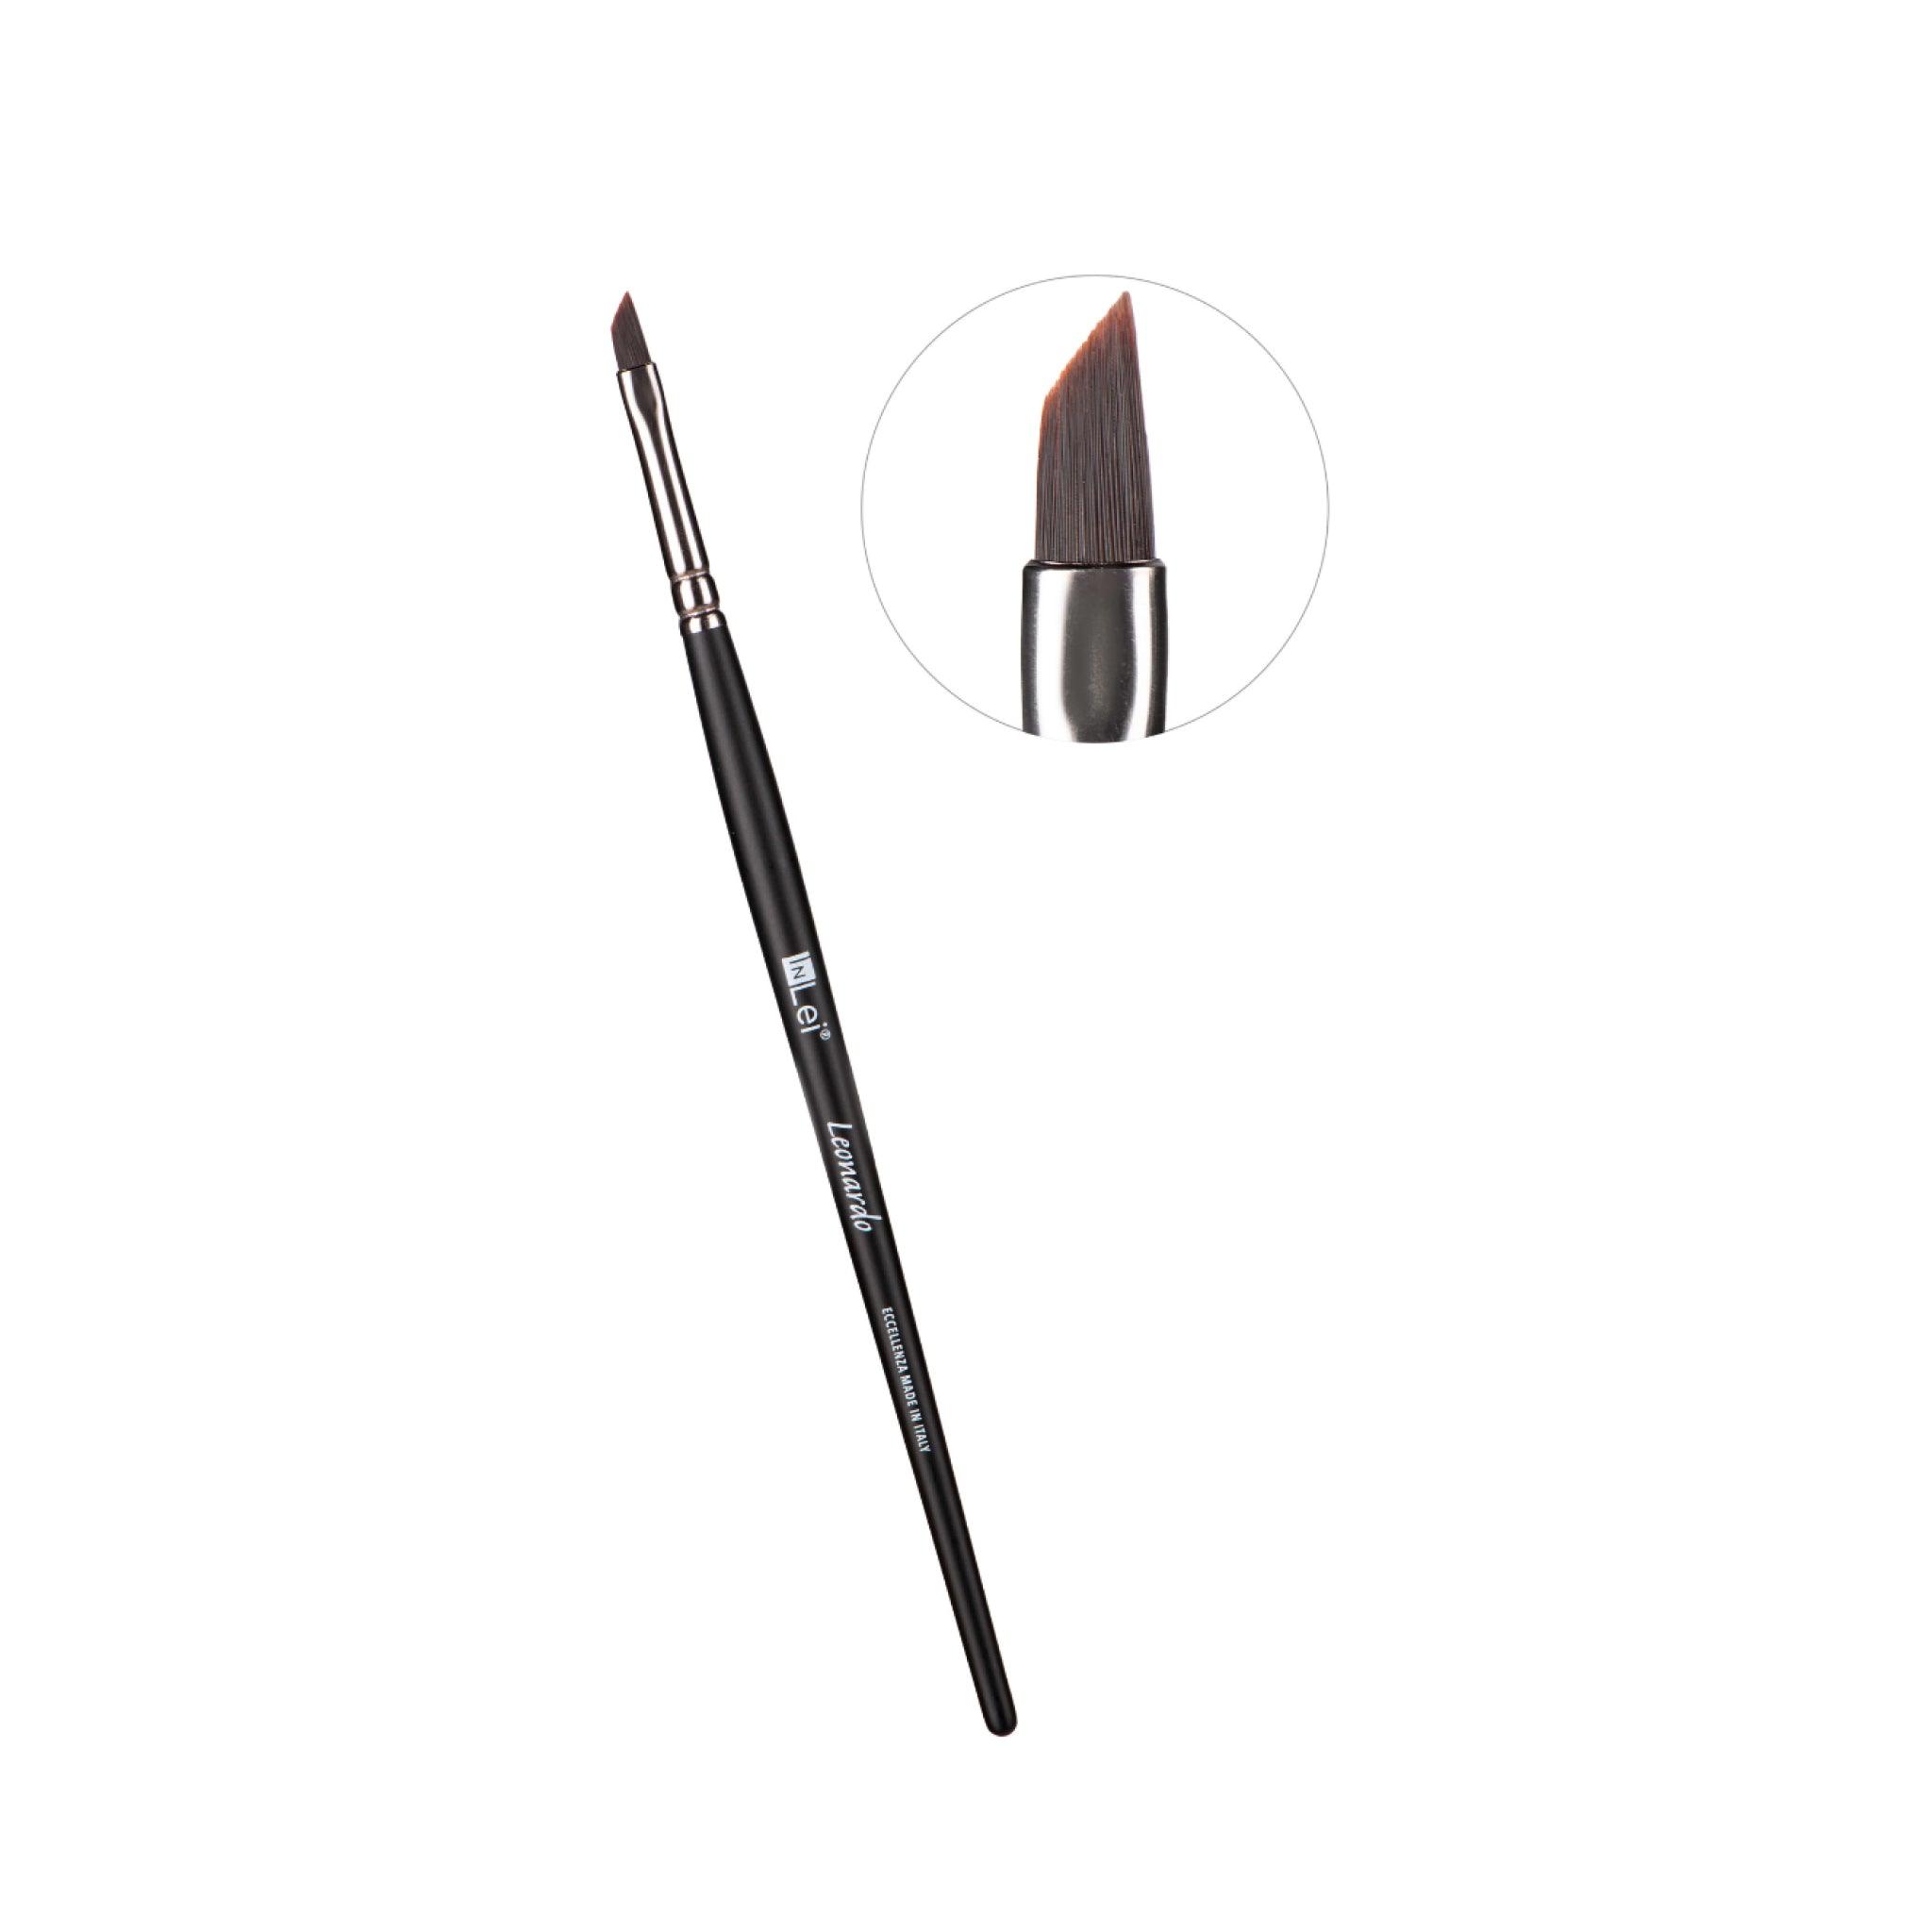 InLei Professional Brushes - The Beauty House Shop